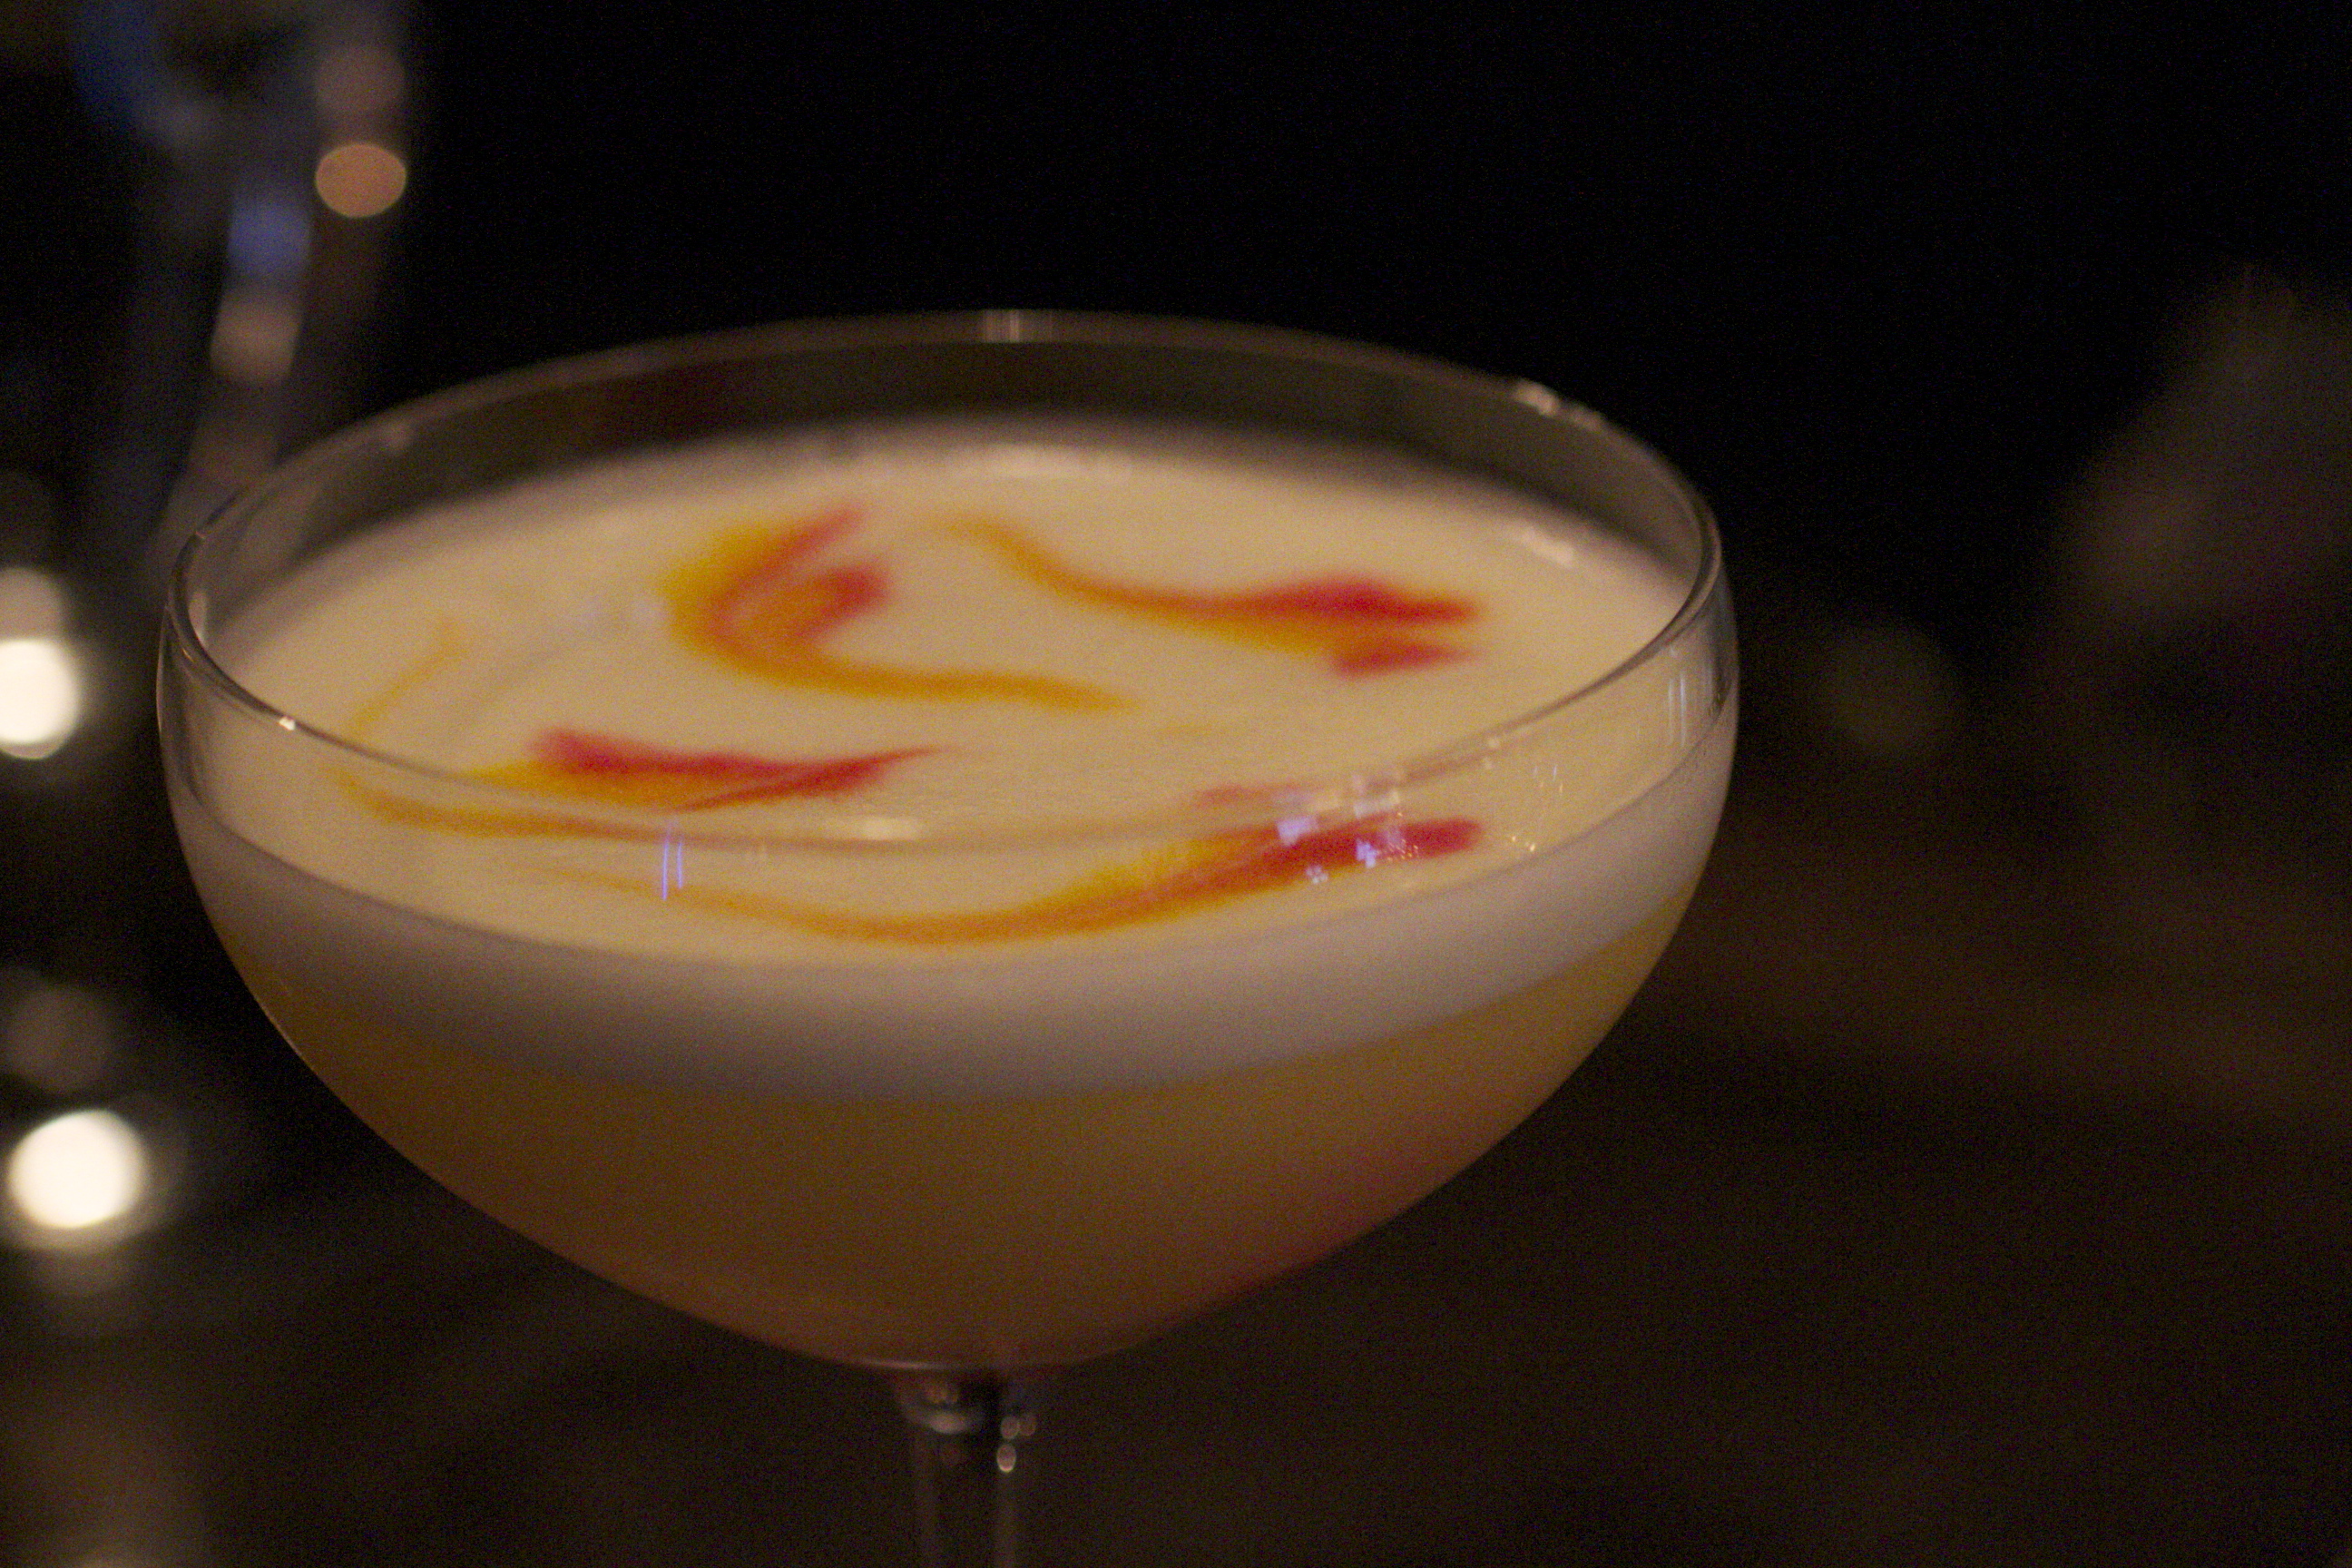 The Saffron Sour at the Tin Table in Capitol Hill, Seattle